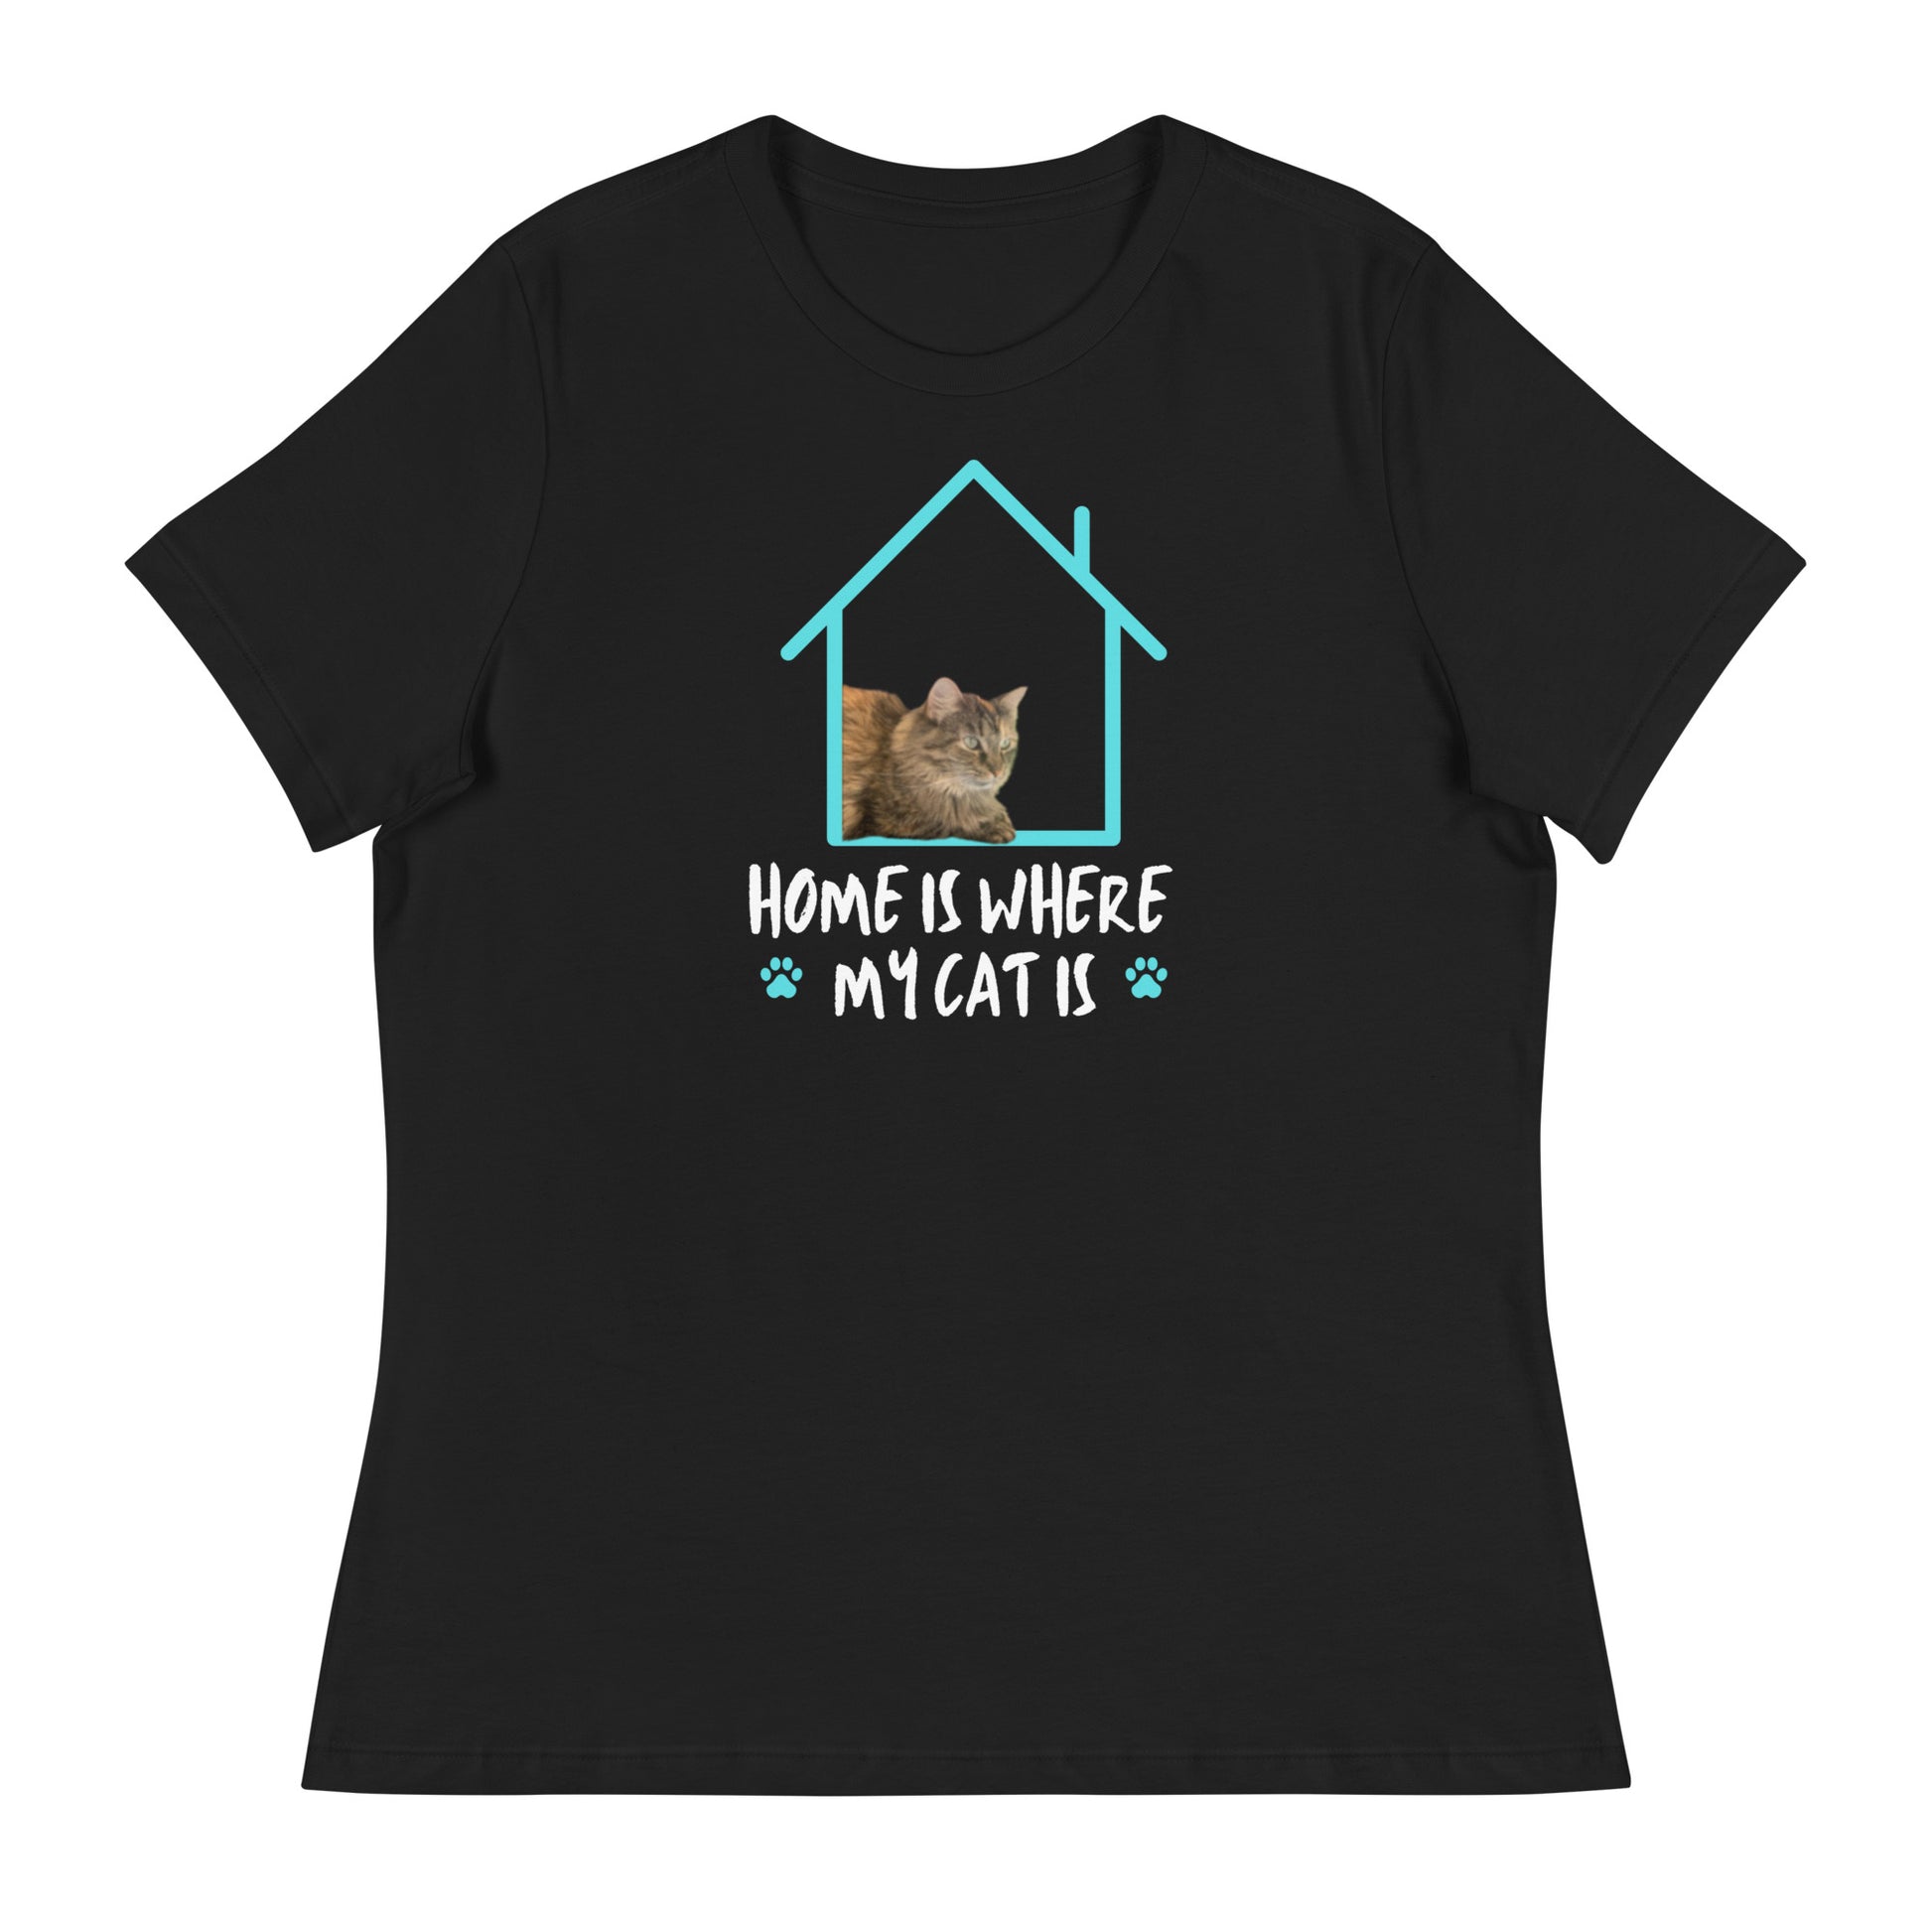 Plus Size Cat Merch for Every Occasion in Regular and Plus Sizes. Tailor your style with our plus-size-friendly customized cat merch, available in regular and plus sizes. Great Christmas and Birthday gift for cat moms and cat lovers!